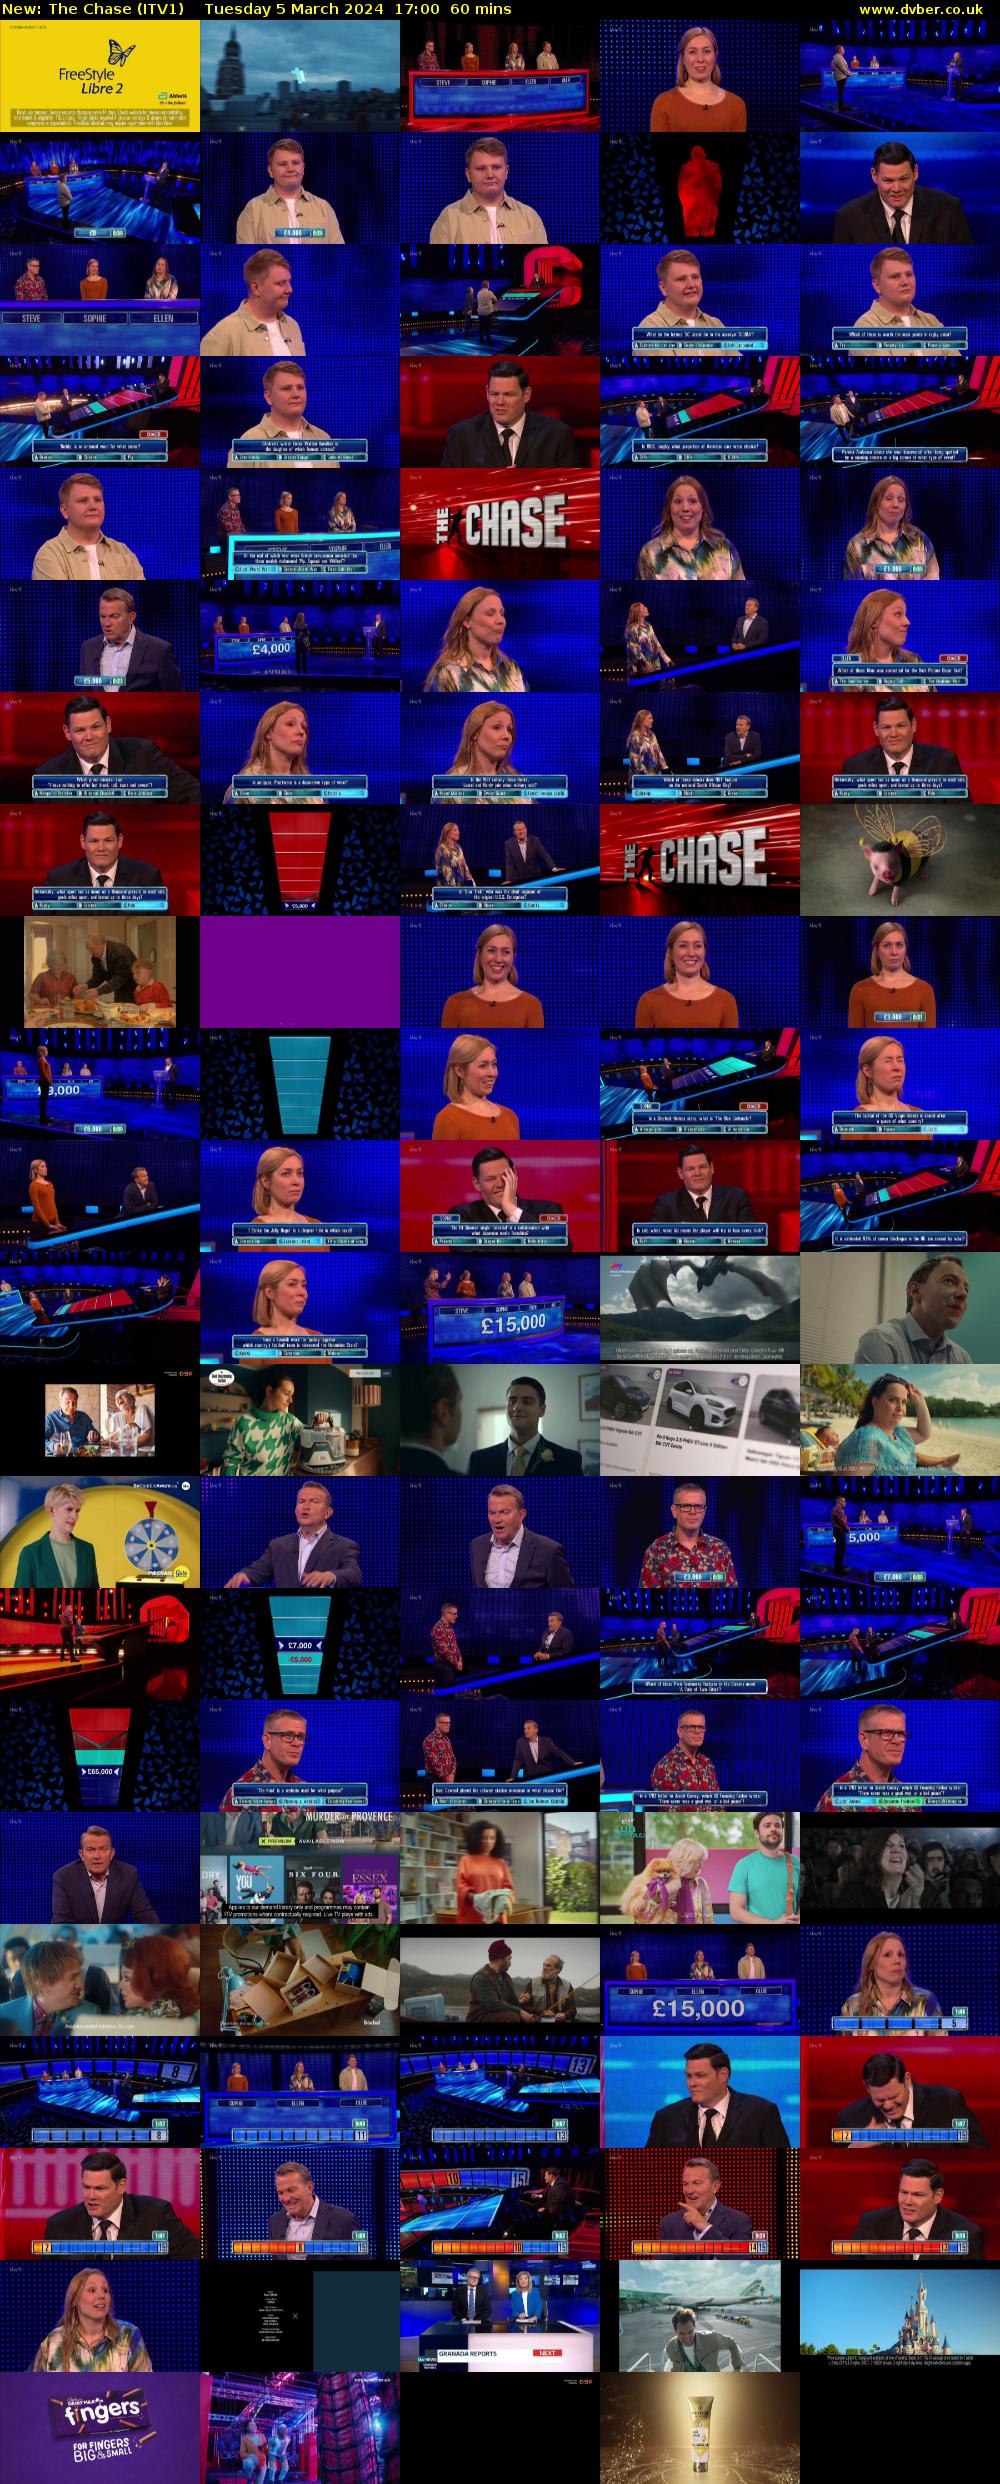 The Chase (ITV1) Tuesday 5 March 2024 17:00 - 18:00